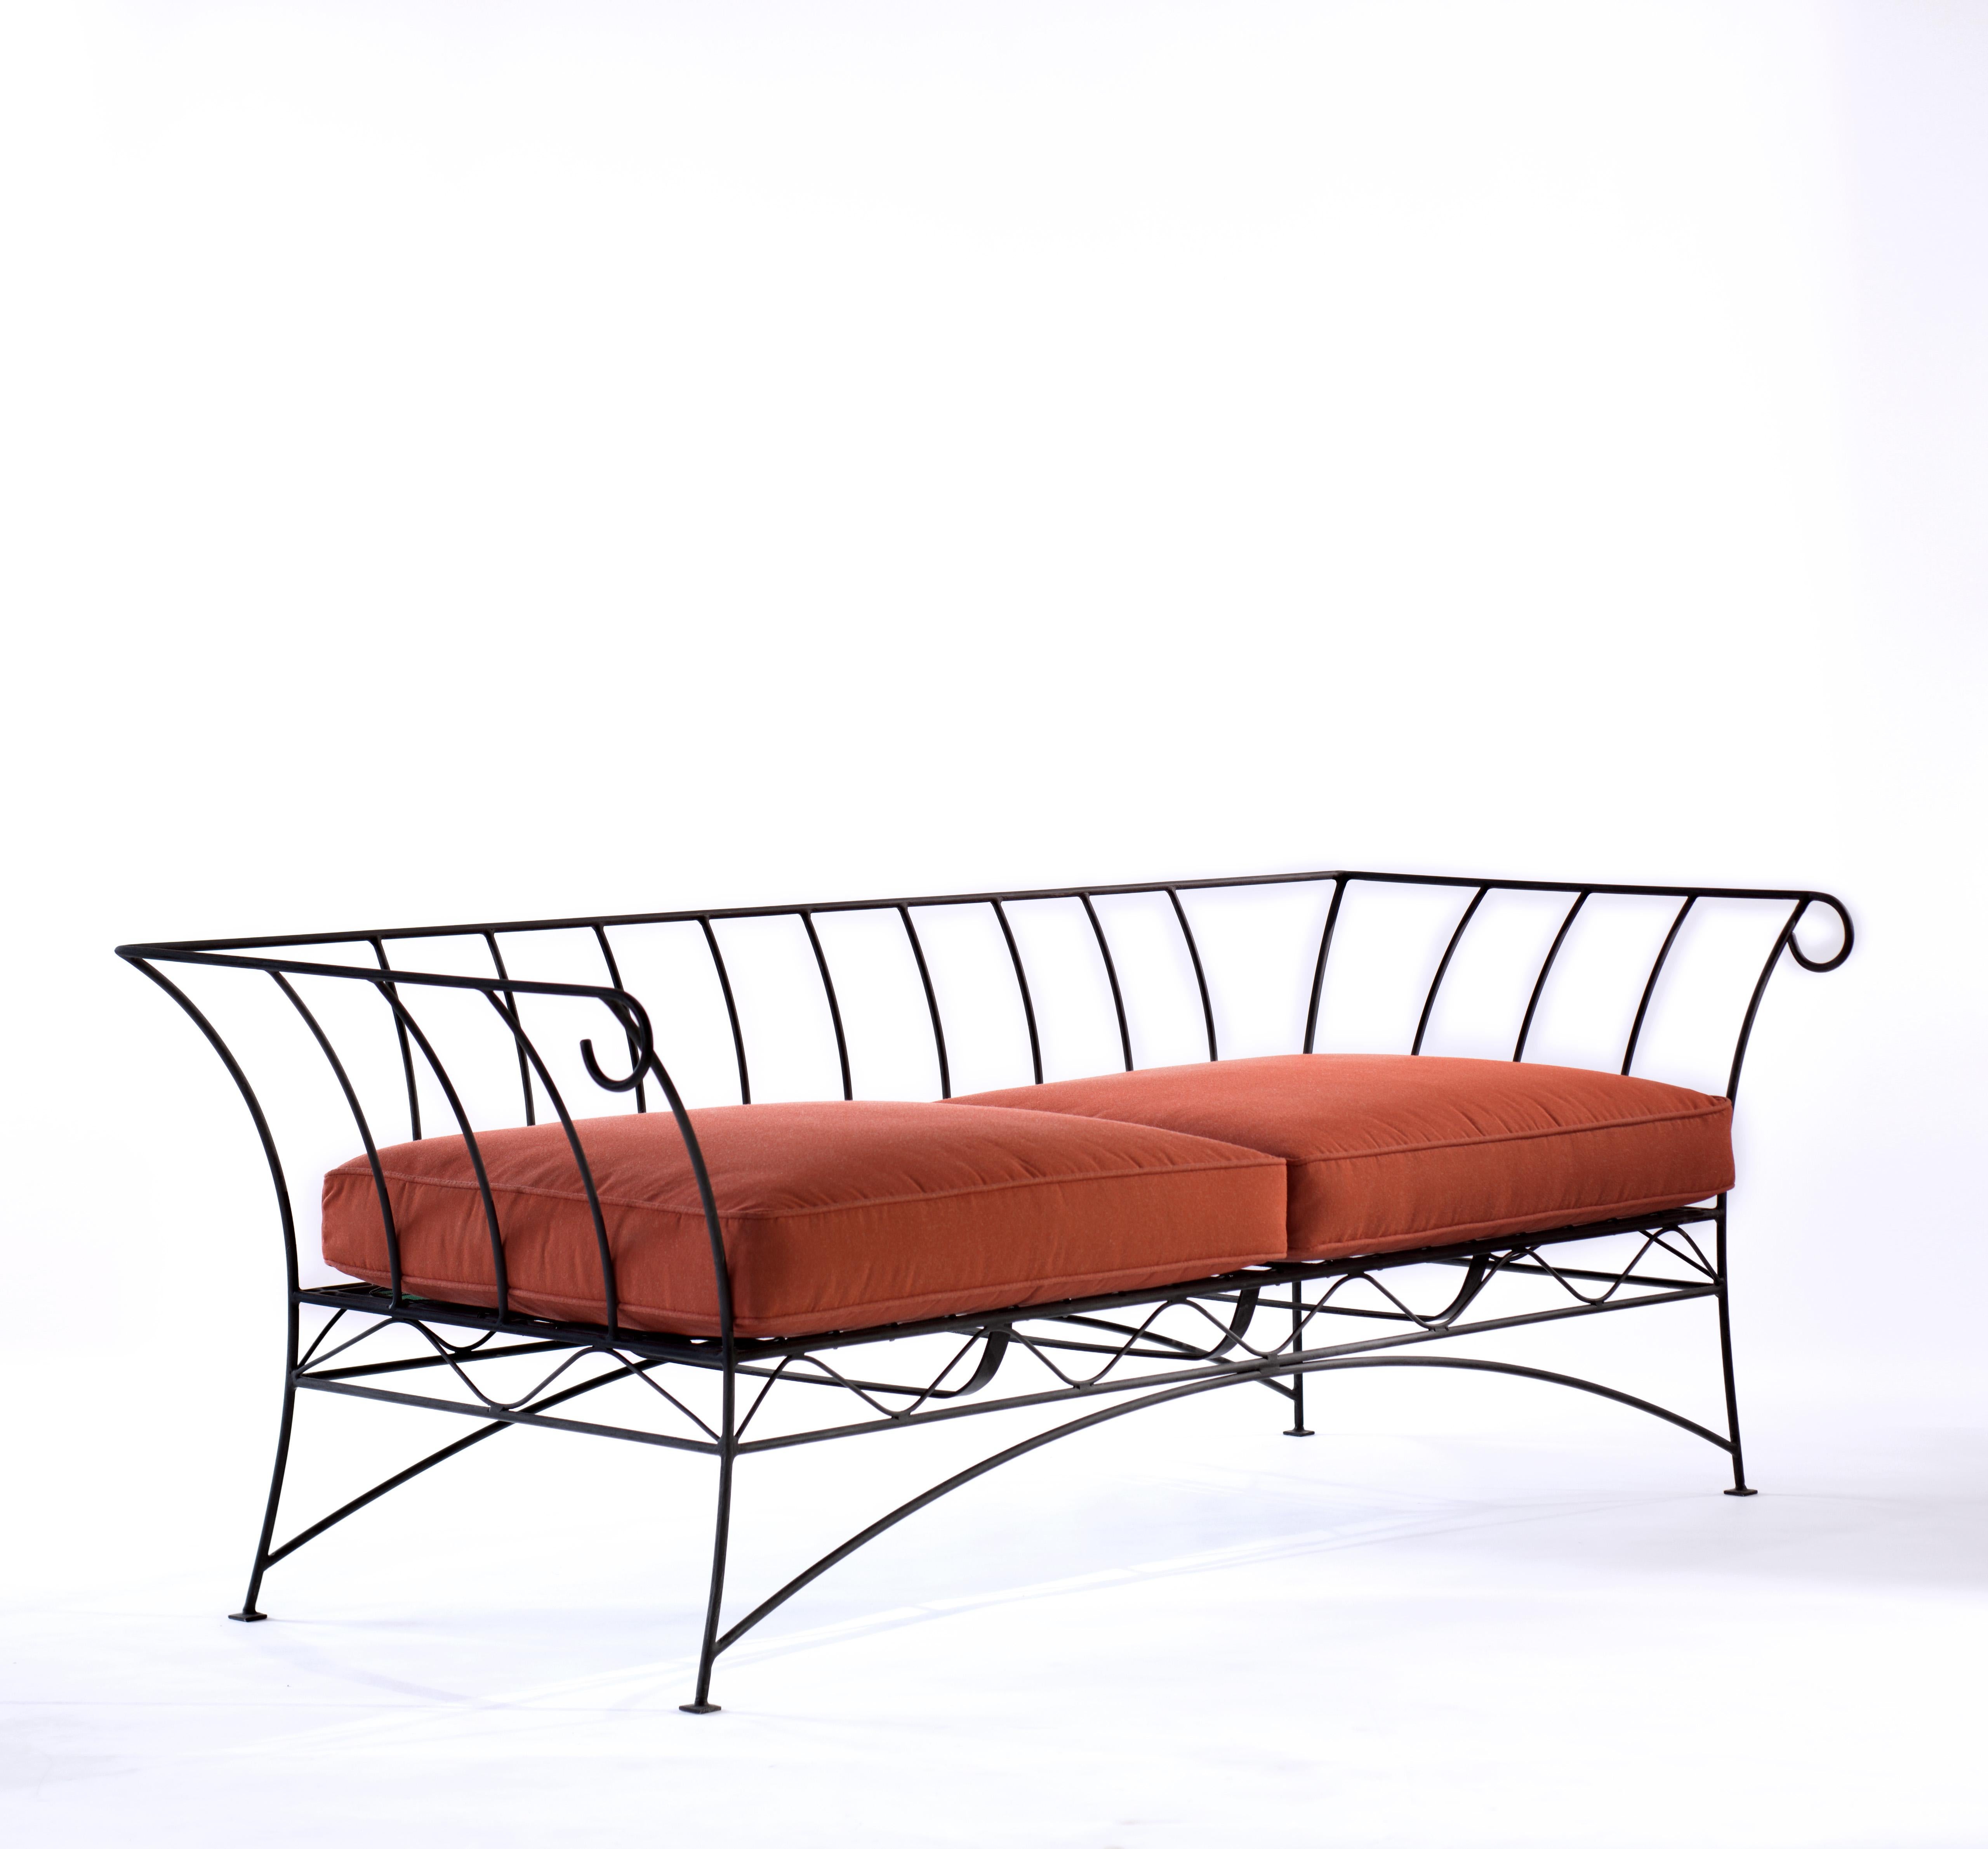 An ebonized steel frame garden sofa with water resistant cushions.
B.B - The decorative light framework holds an elasticated webbed base giving the cushions a comfortable springiness. This sofa sits well in the garden or on a terrace and also works